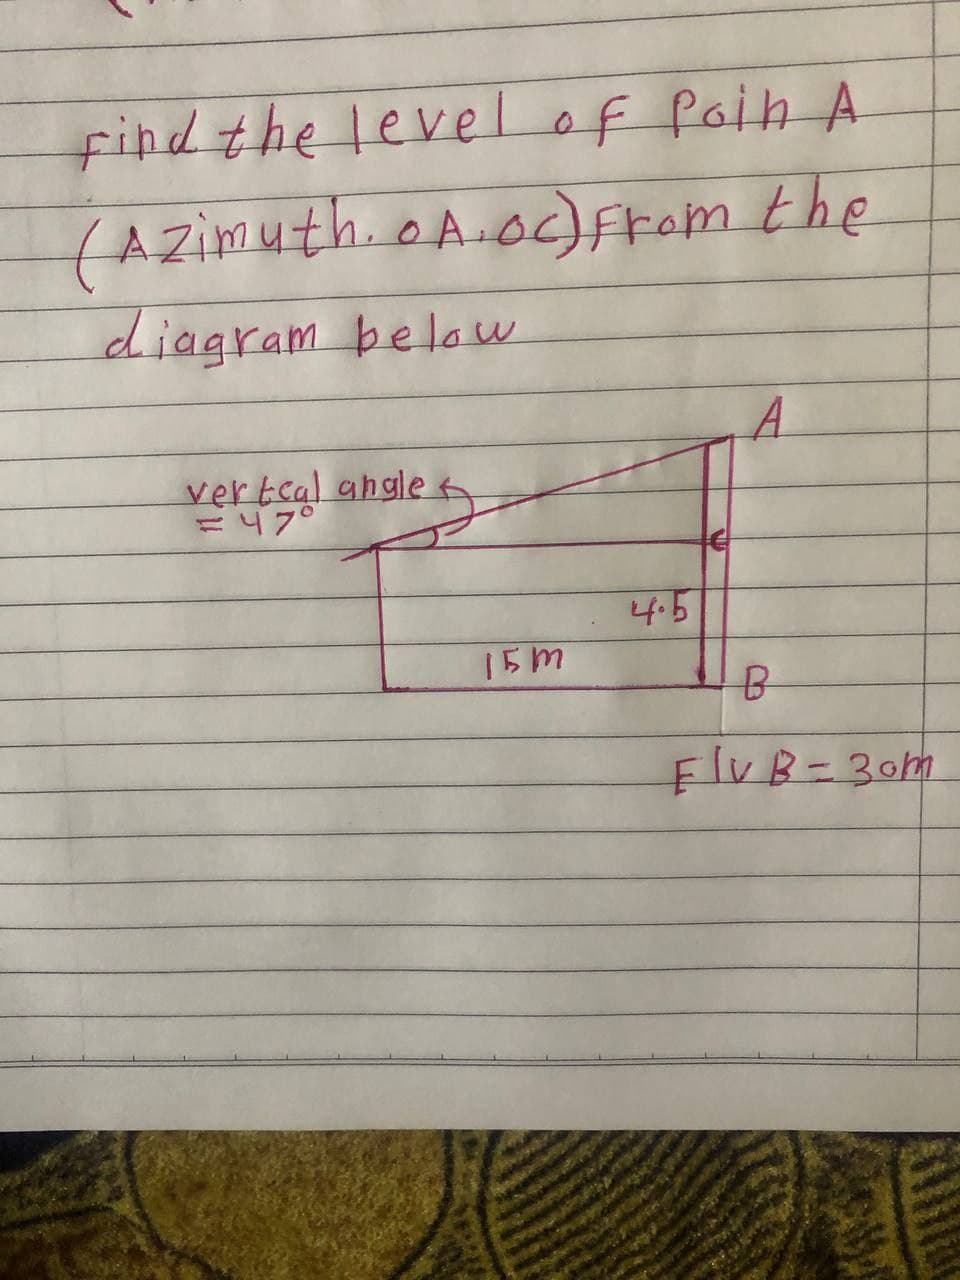 Find the level of Poin A
(Azimuth, o A.Oc) from the
diagram below
A
verteal angle
= 47°
4.5
15m
B
Flv B = 30m